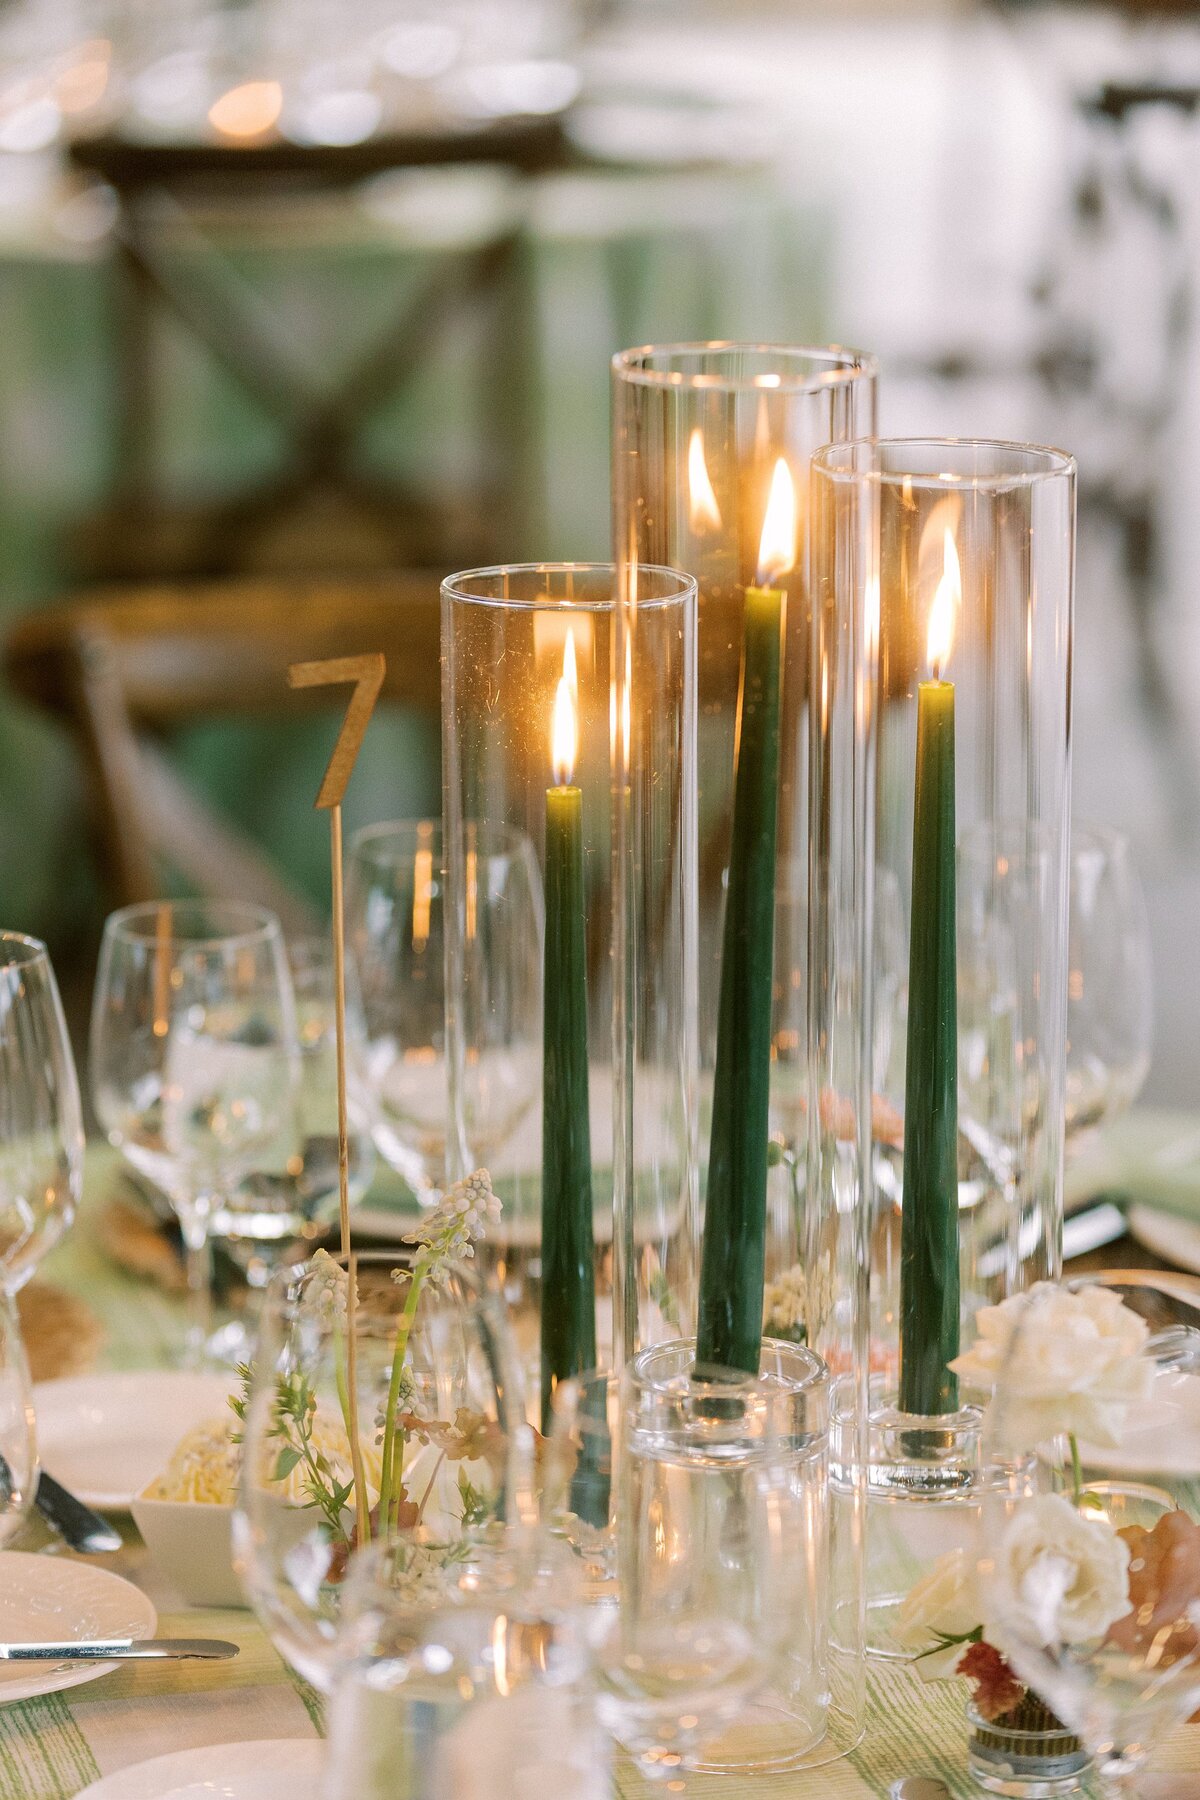 Wedding reception table with green pillar candles